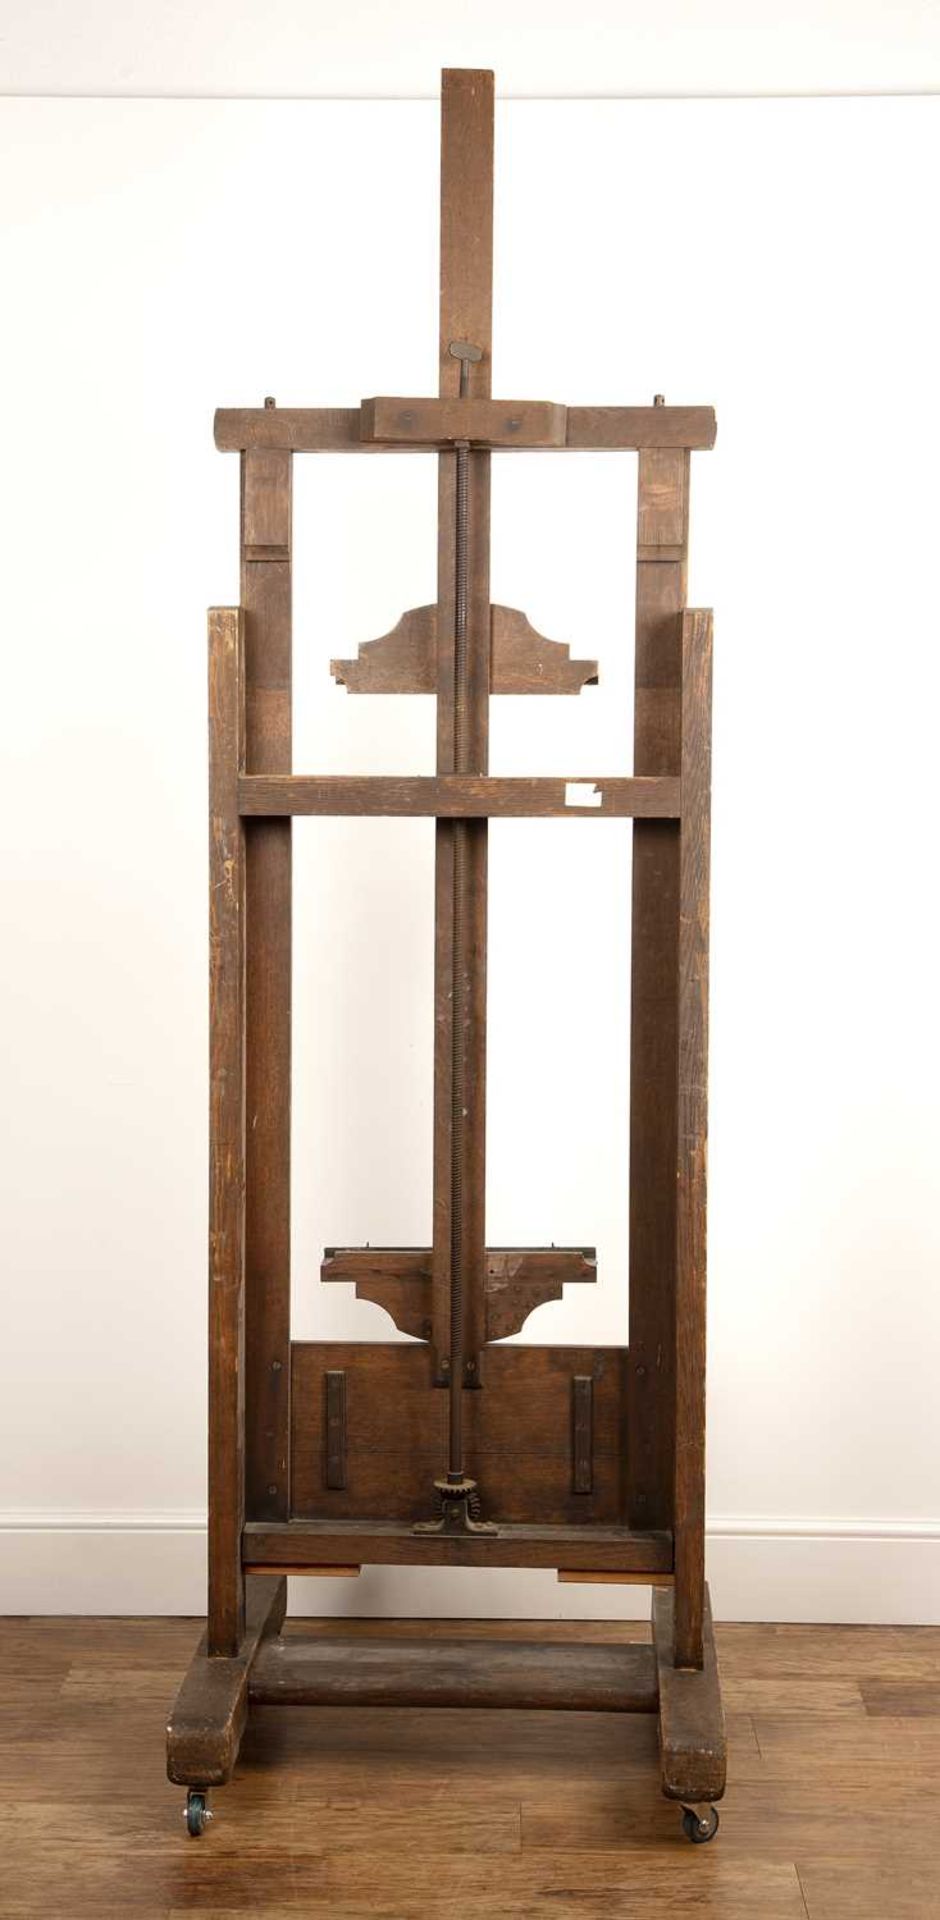 Robertson & Co. Ltd, London artist's Gallery easel 19th Century, with adjustable mechanism, brass - Image 4 of 4